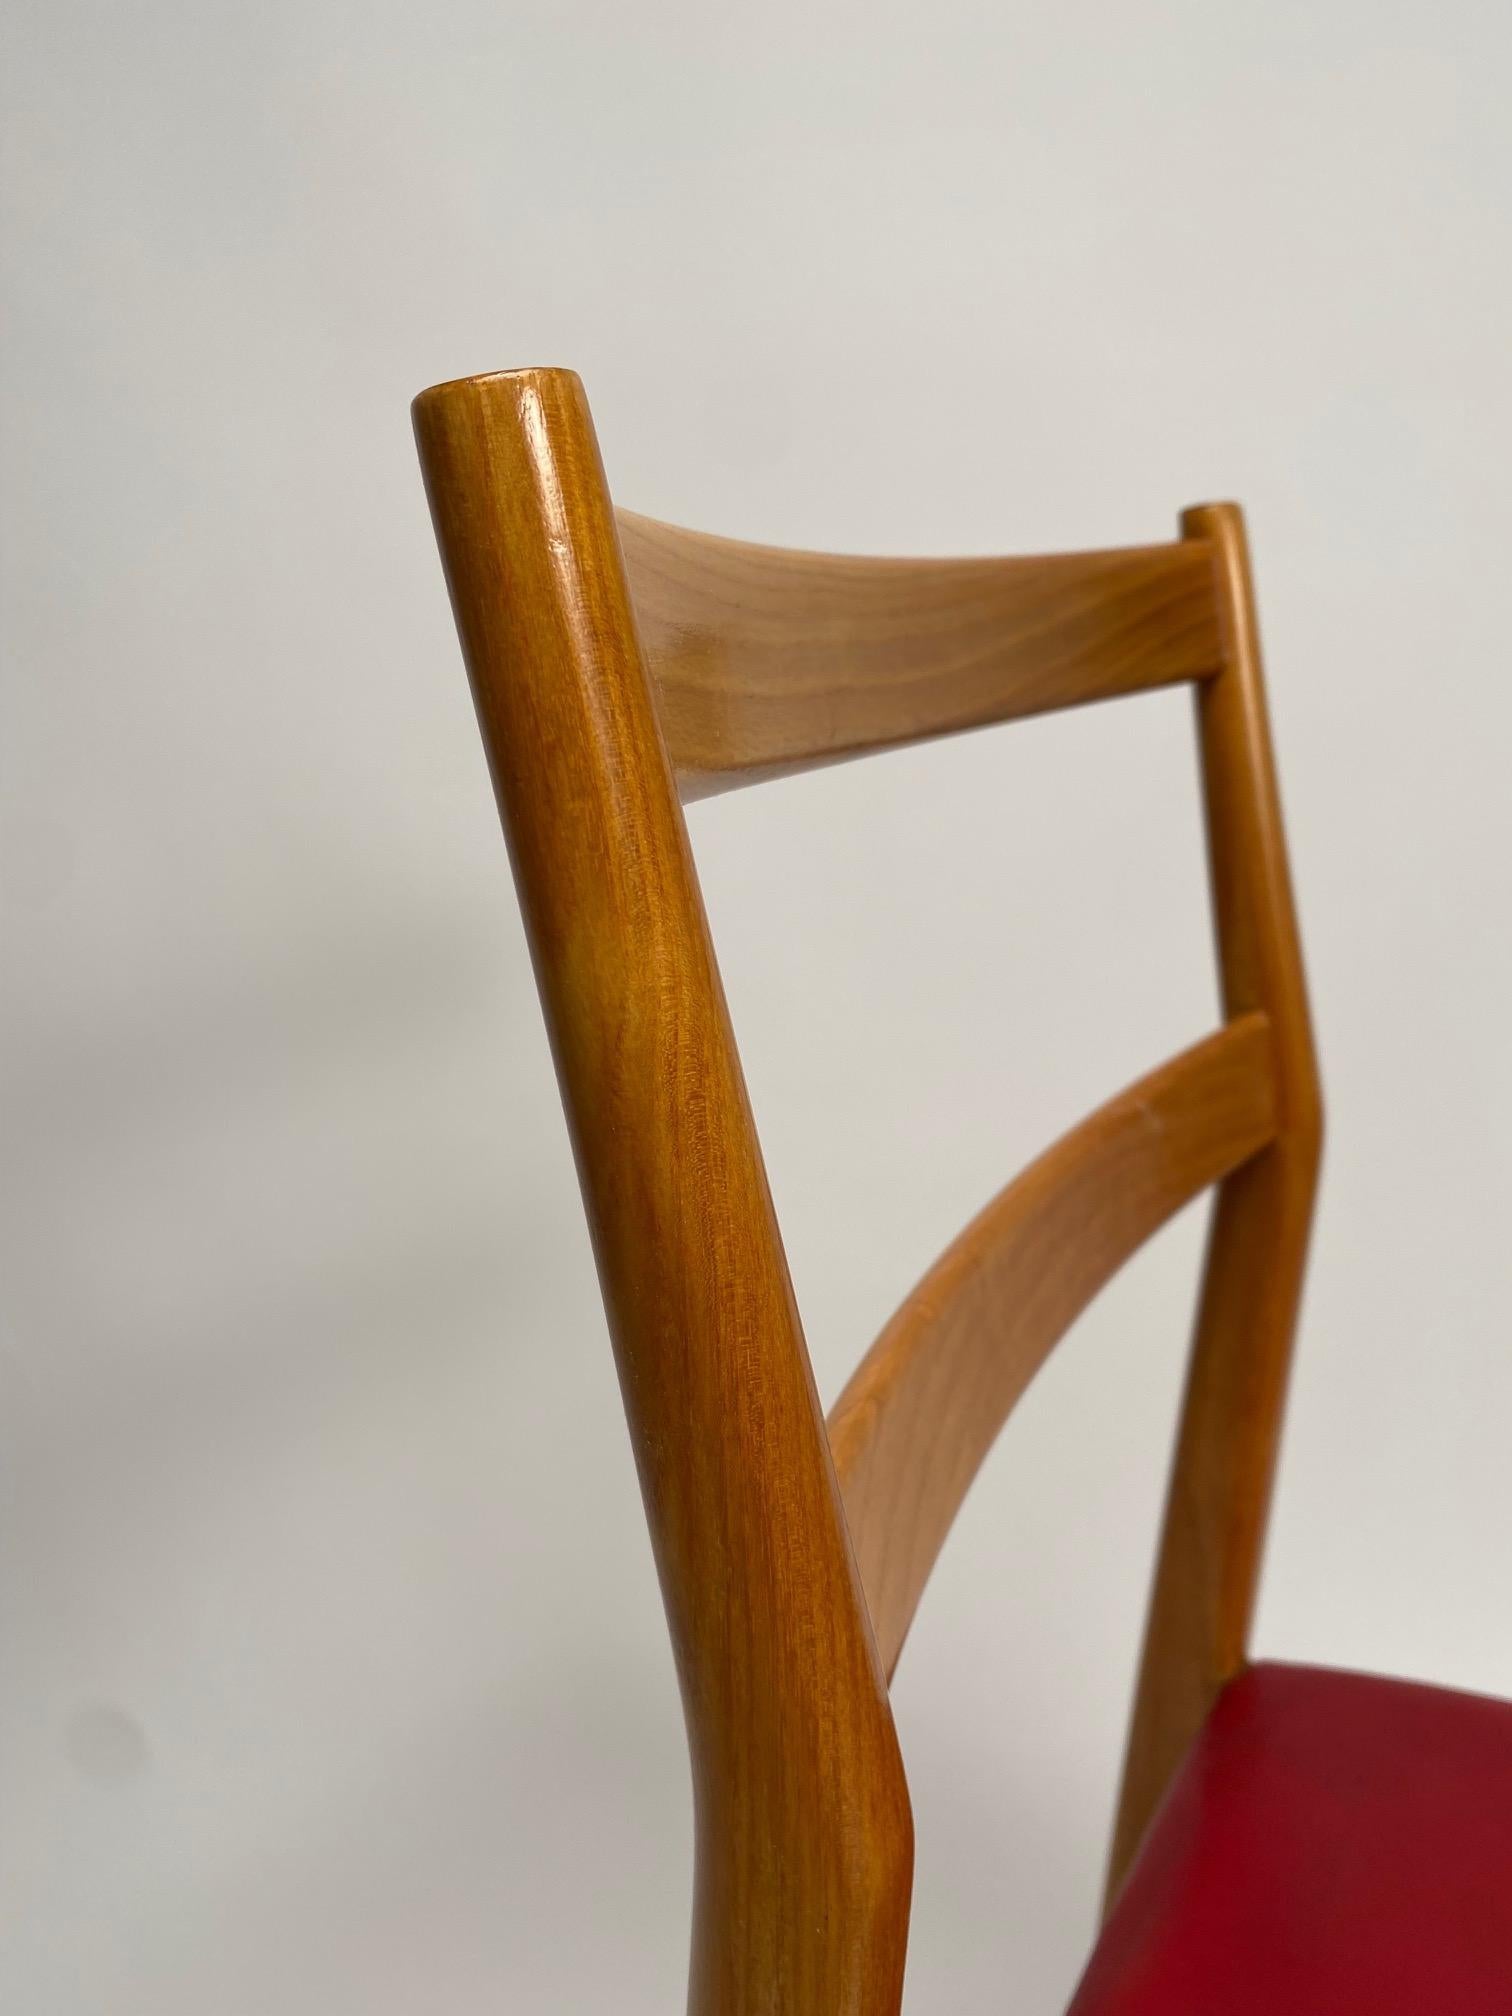 Pair of Leggera chairs in light wood, Gio Ponti, Cassina  (First Edition) For Sale 4